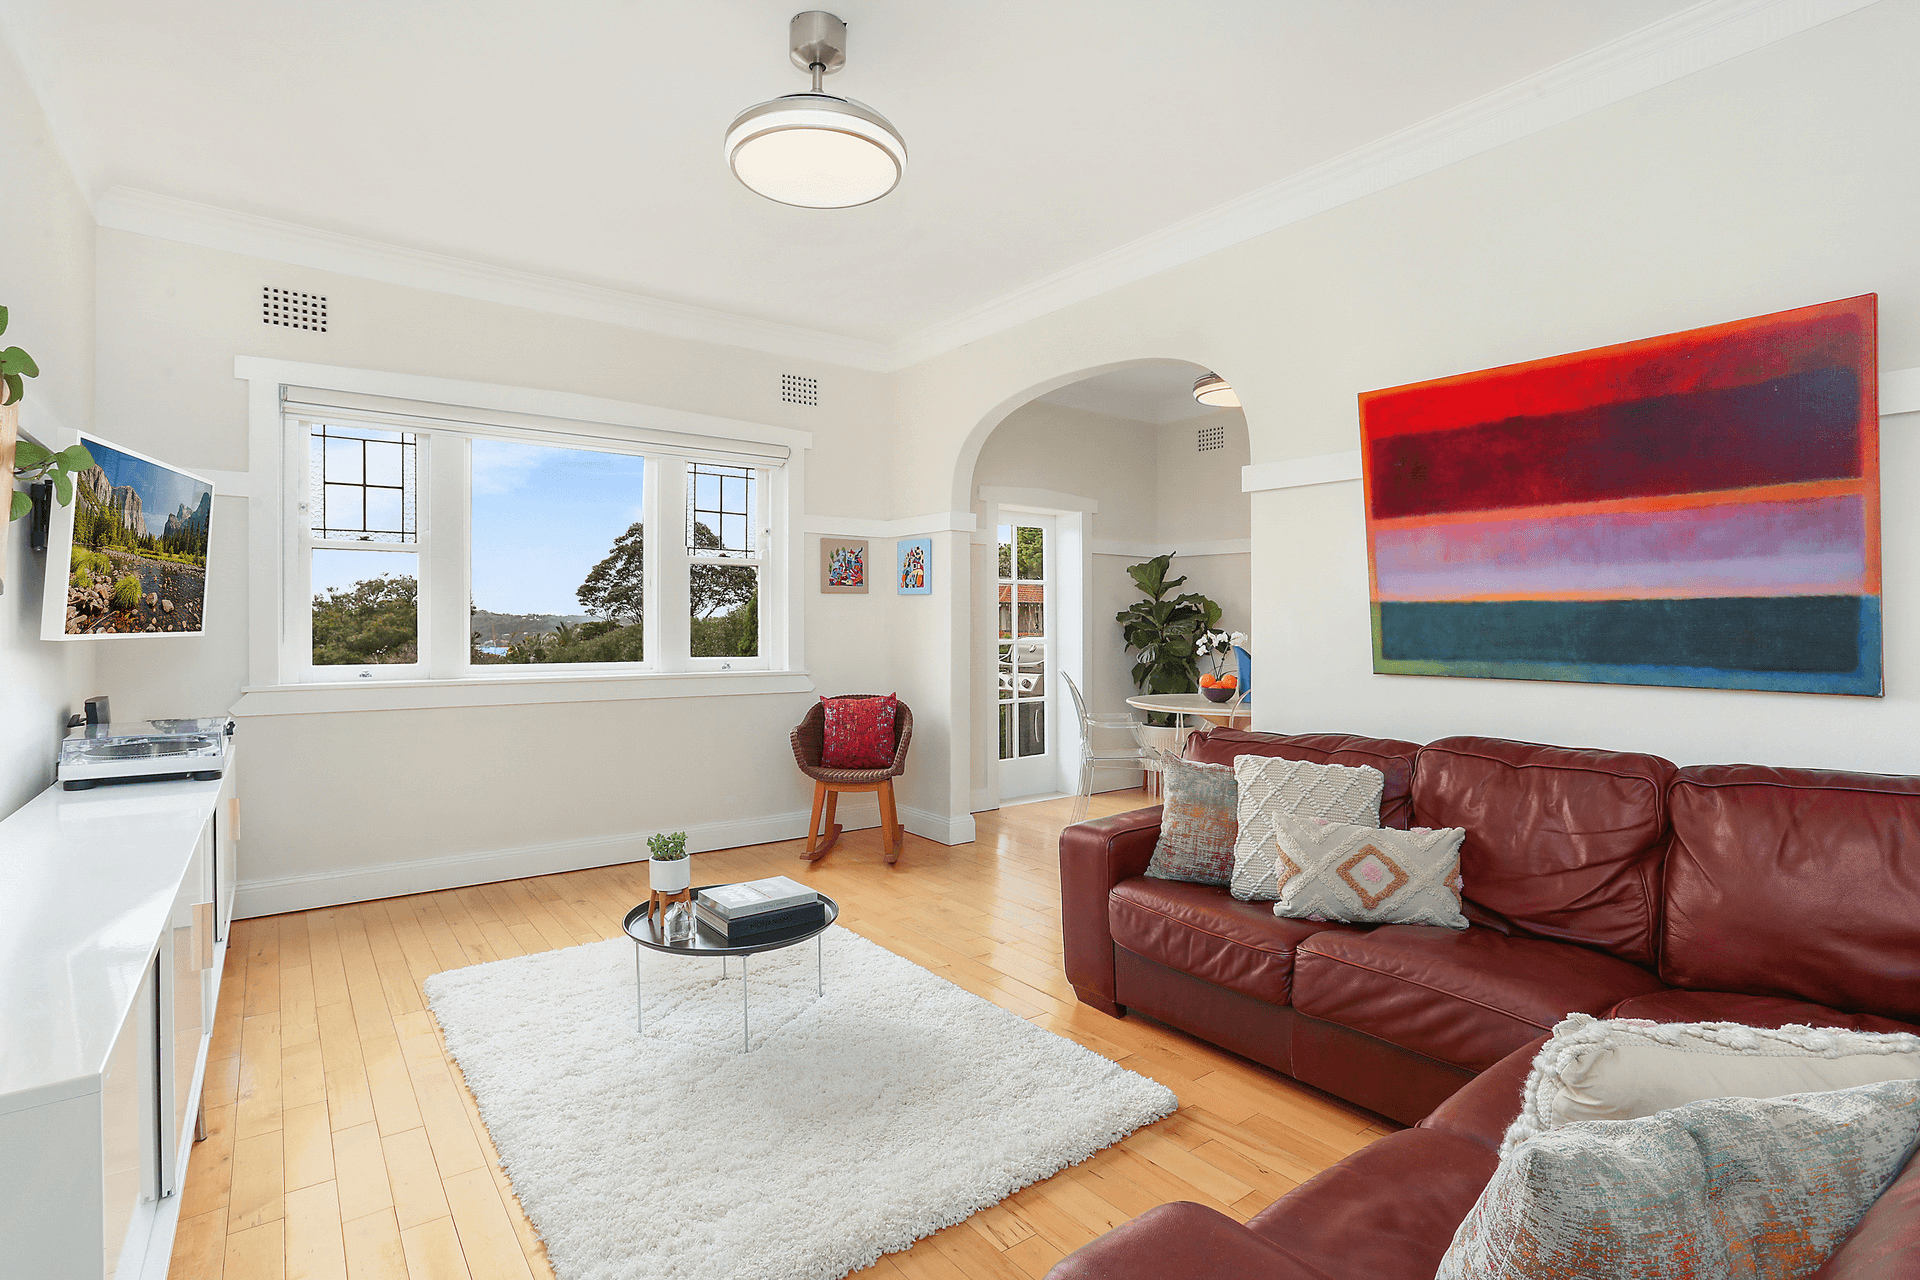 3/70 New South Head Road, Vaucluse, NSW 2030